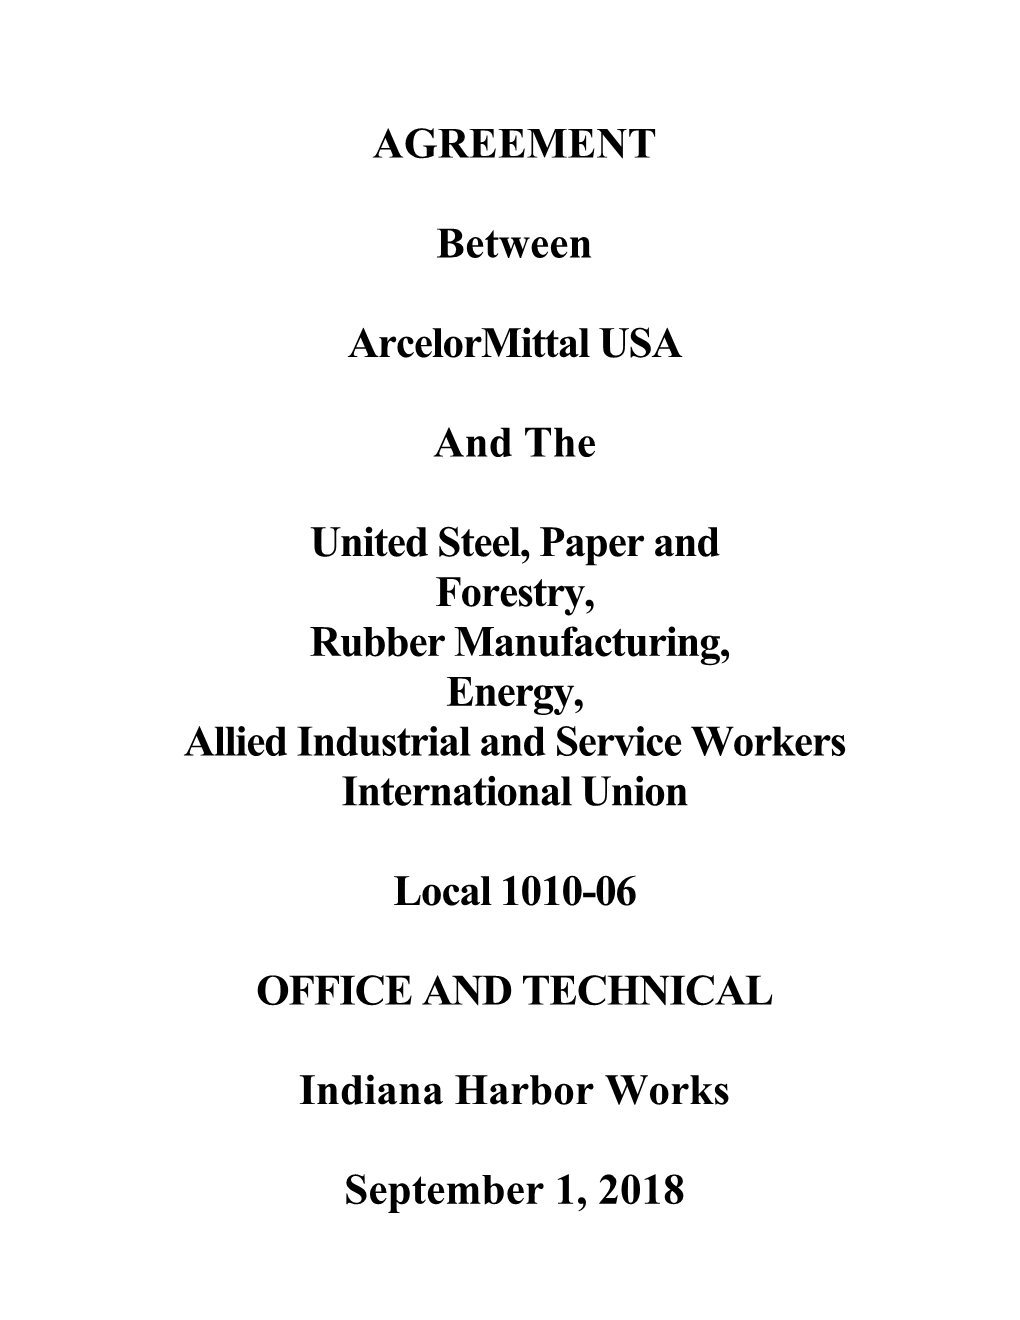 AGREEMENT Between Arcelormittal USA and the United Steel, Paper